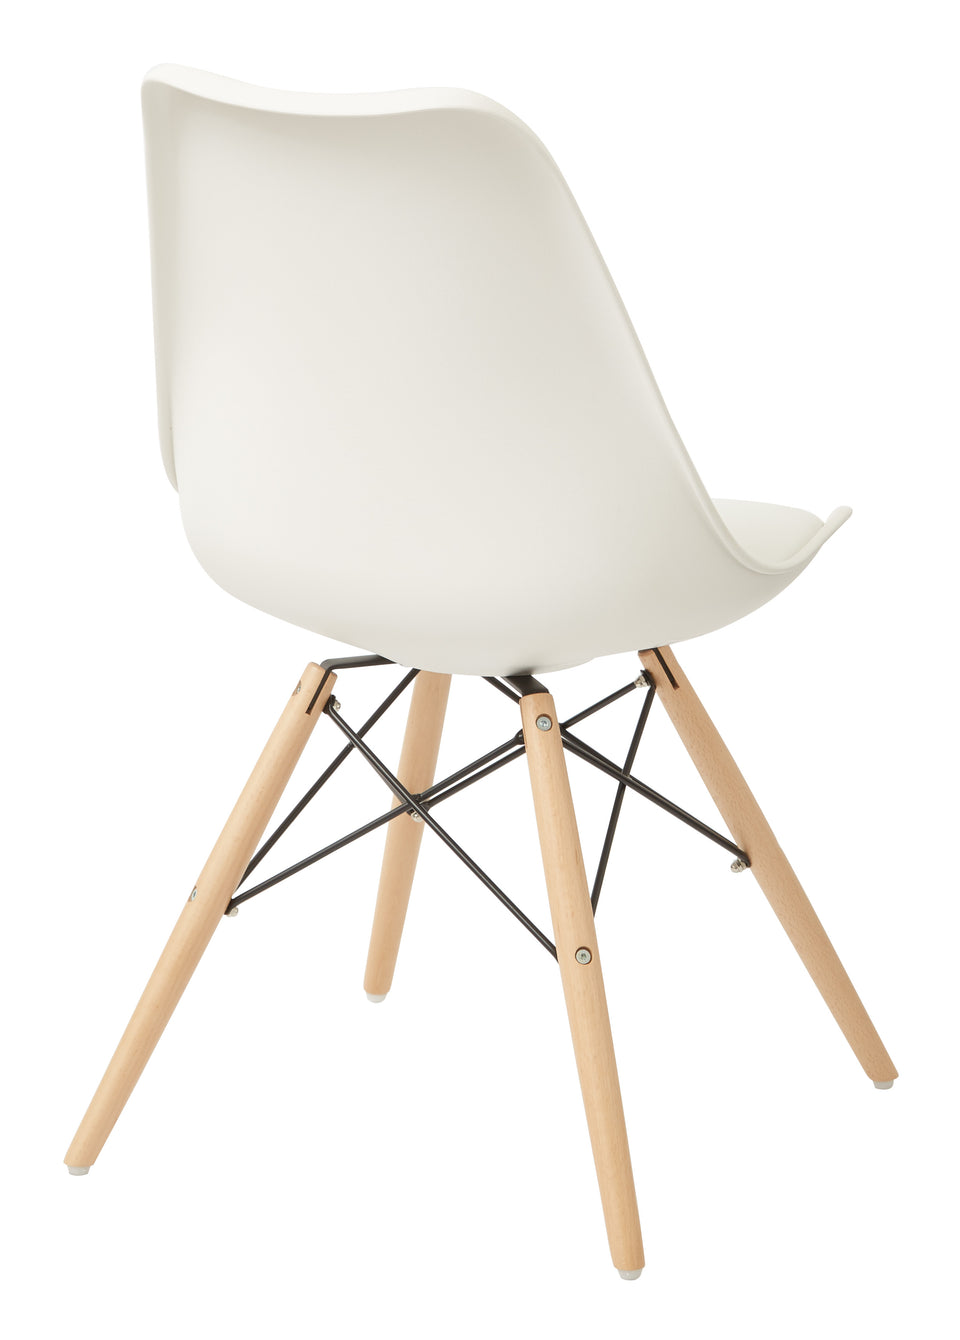 mid century modern aimes white bucket chair with natural post legs scandinavian design inspired from decurban.com back angle view